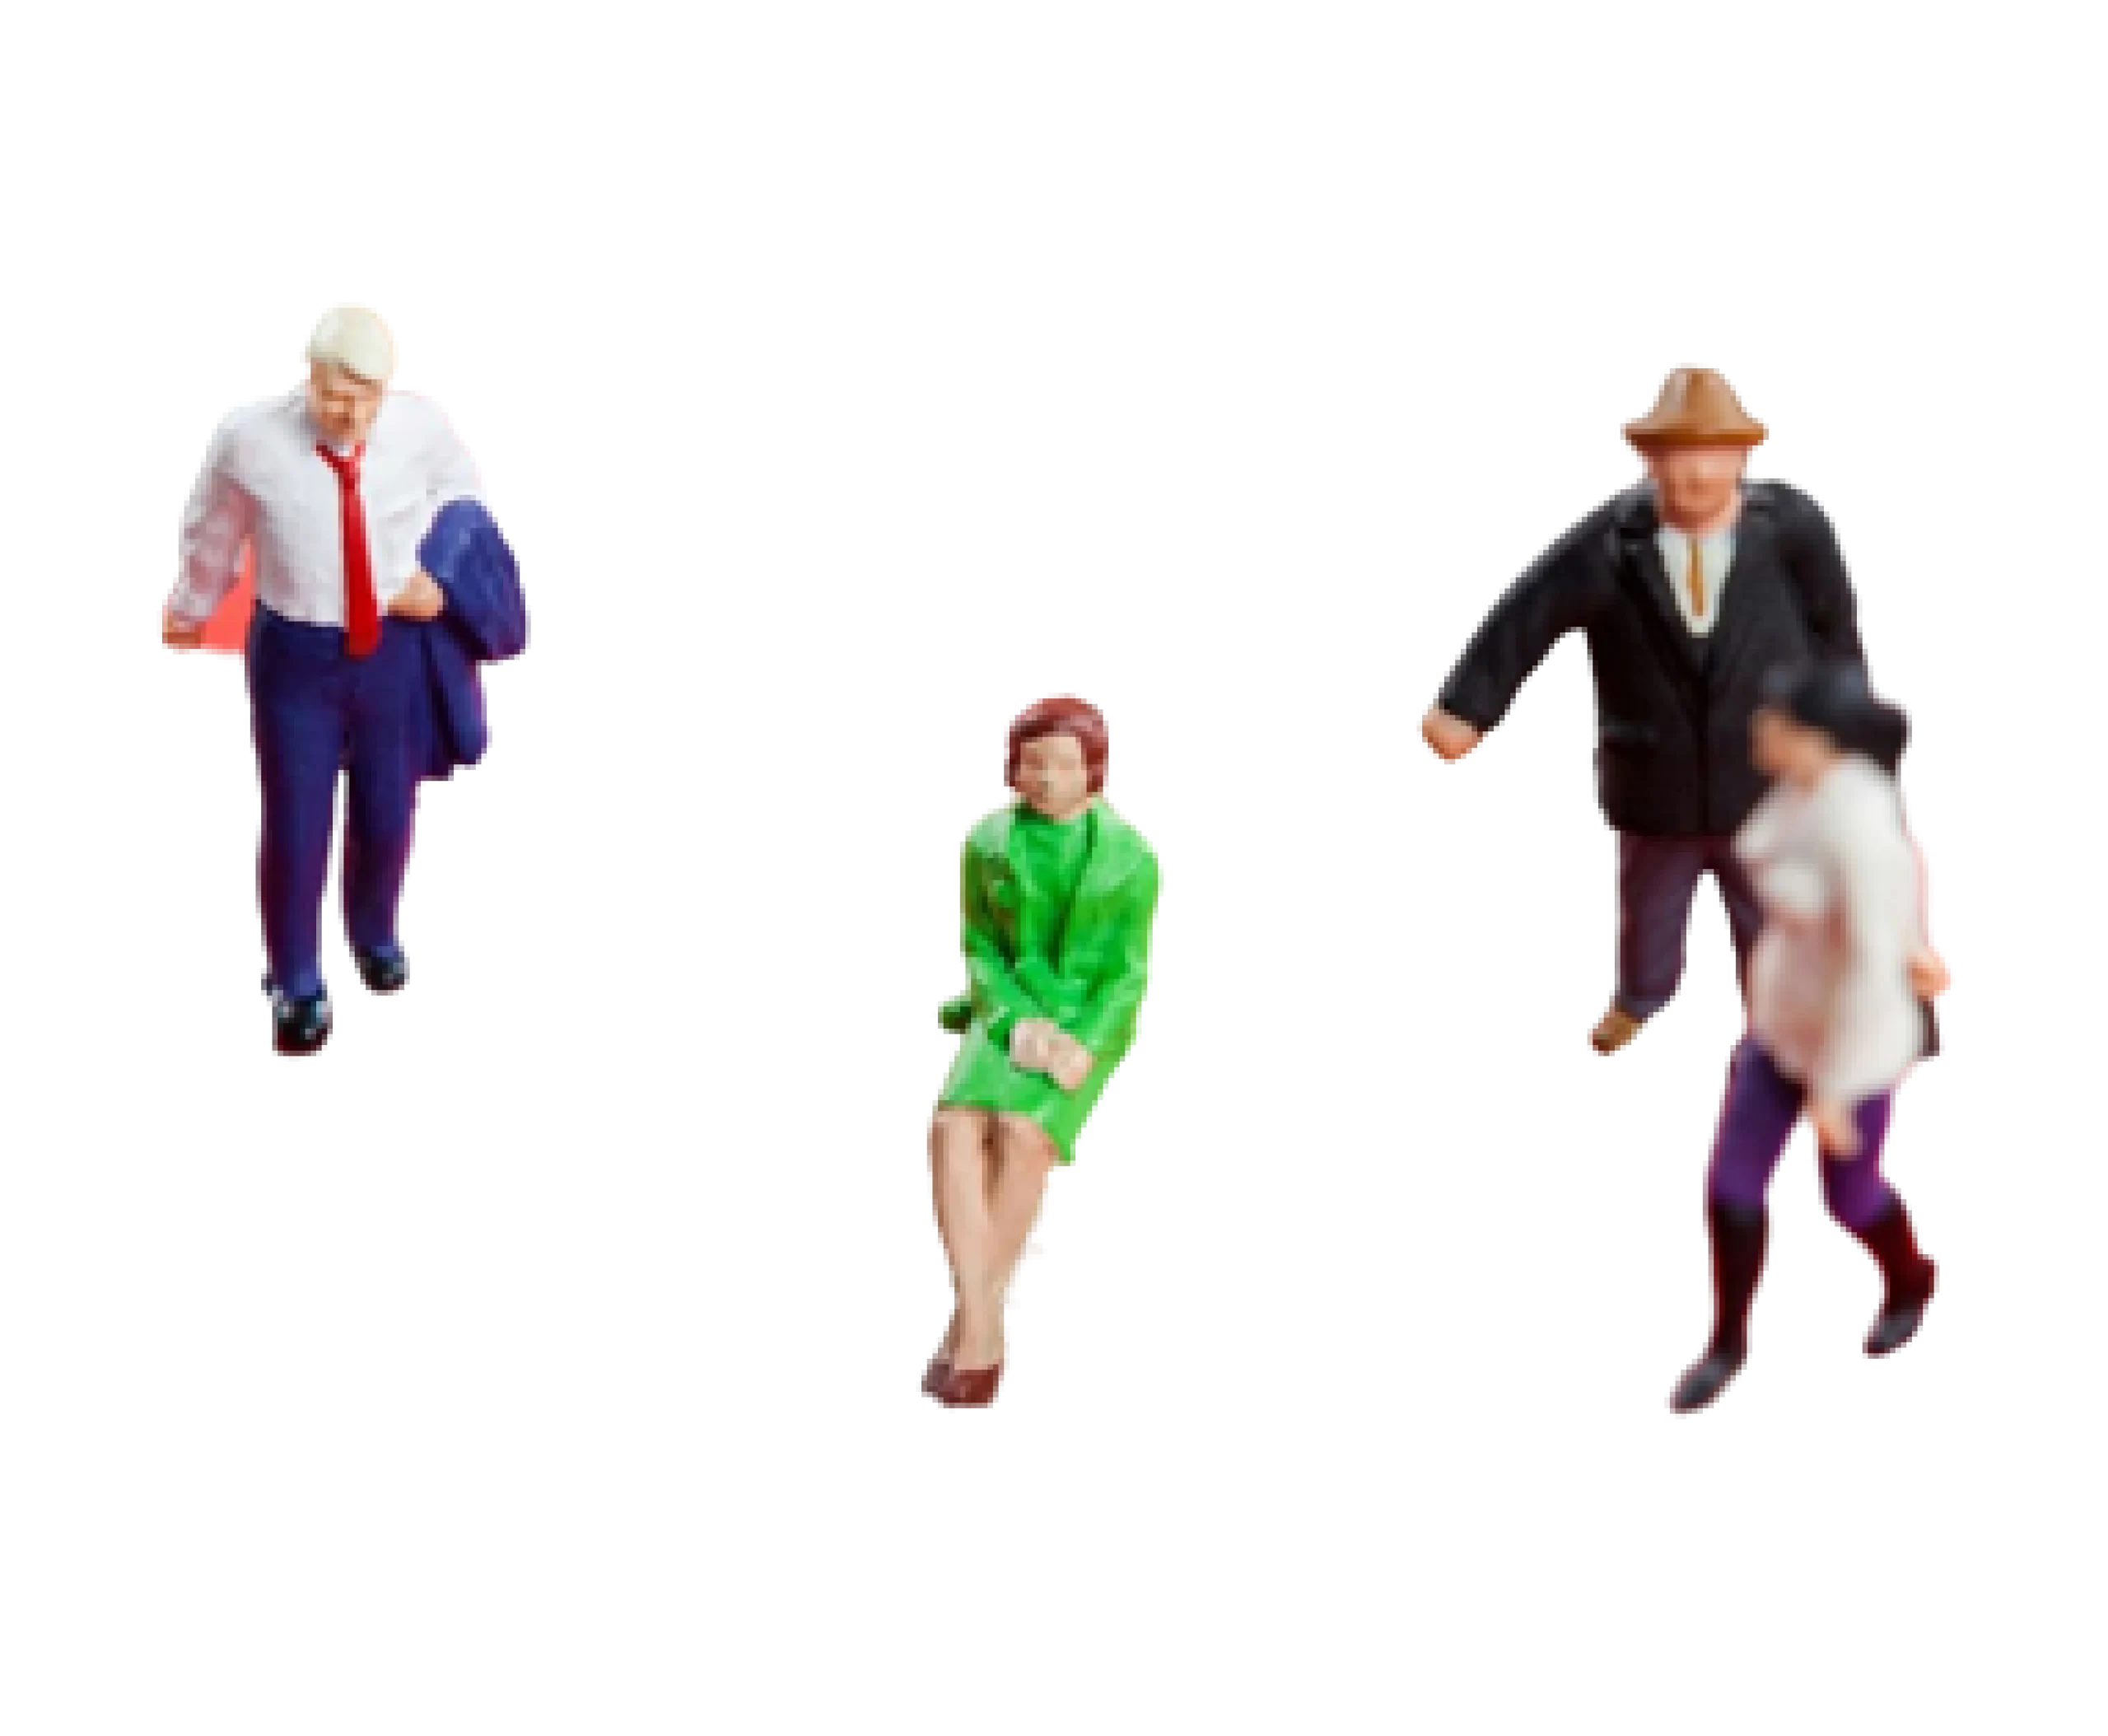 Miniature figures of people walking in different directions on a white background.